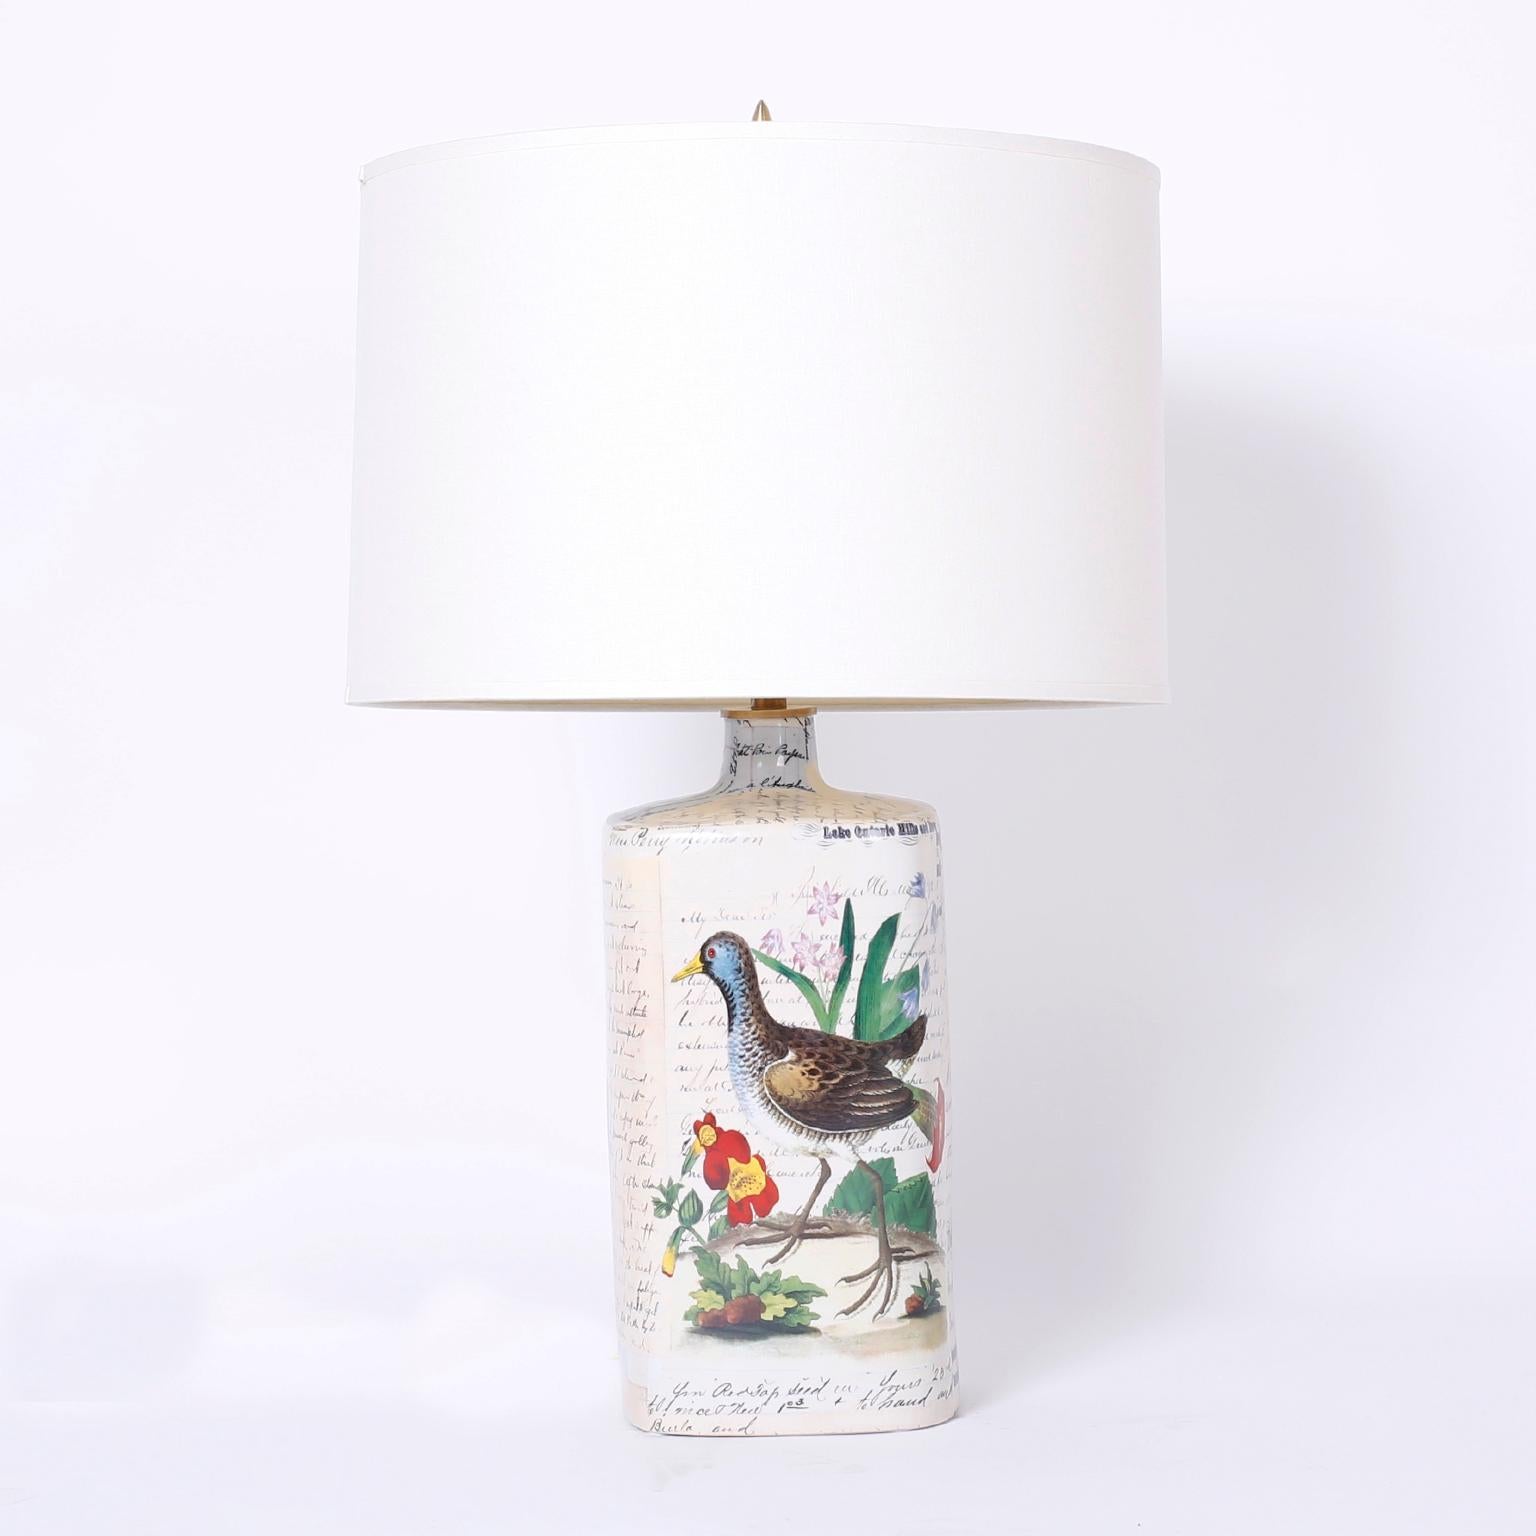 Pair of vintage porcelain table lamps decorated with a delightful decoupage technique depicting birds, flowers and a scholastic style script reminiscent of early ornithological engravings. Signed John
Derian on the bottoms.